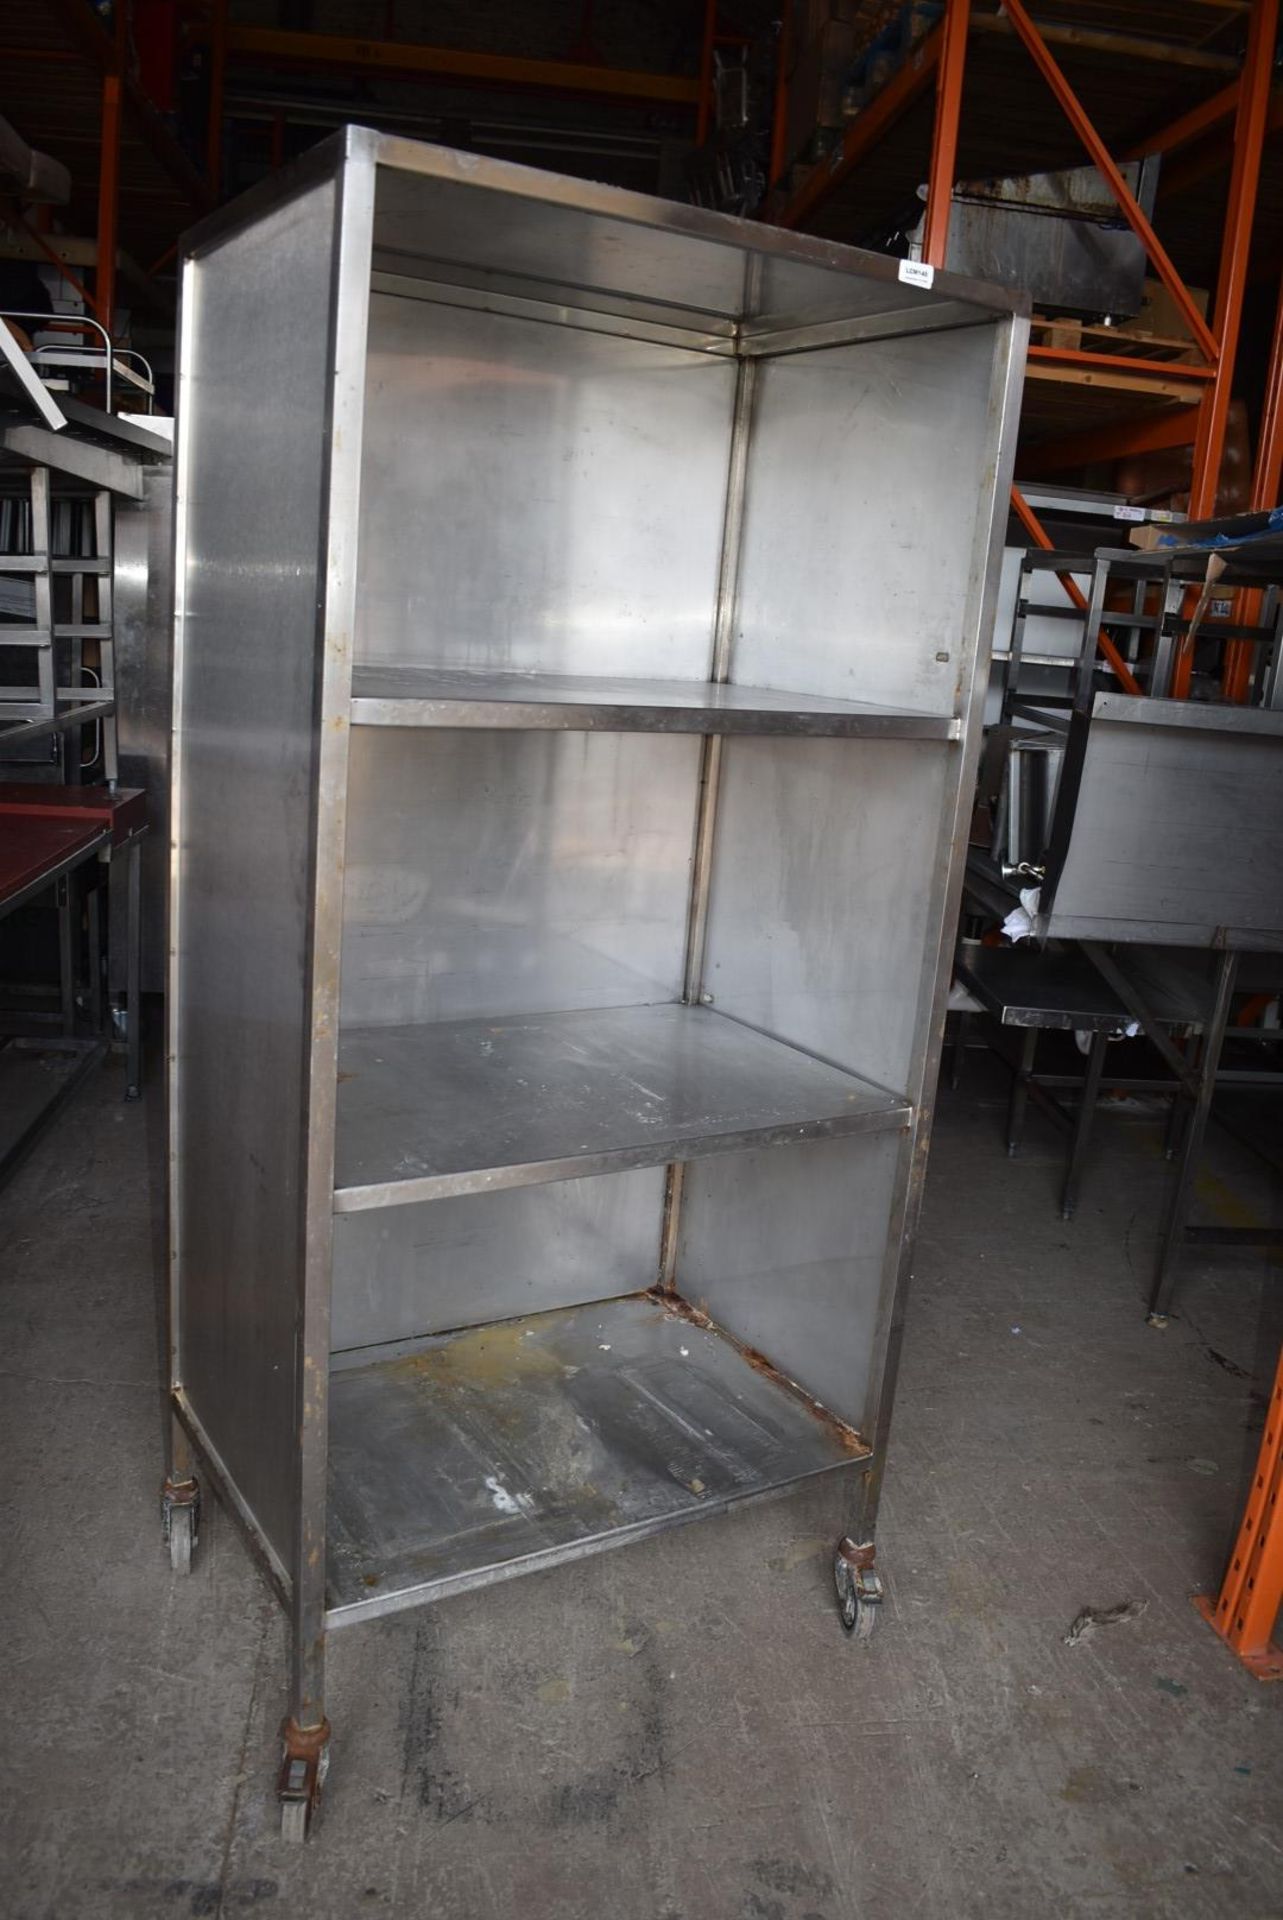 1 x Stainless Steel Commercial Mobile Kitchen Shelf Unit - Three Tier With Closed Side and Back Pane - Image 3 of 7